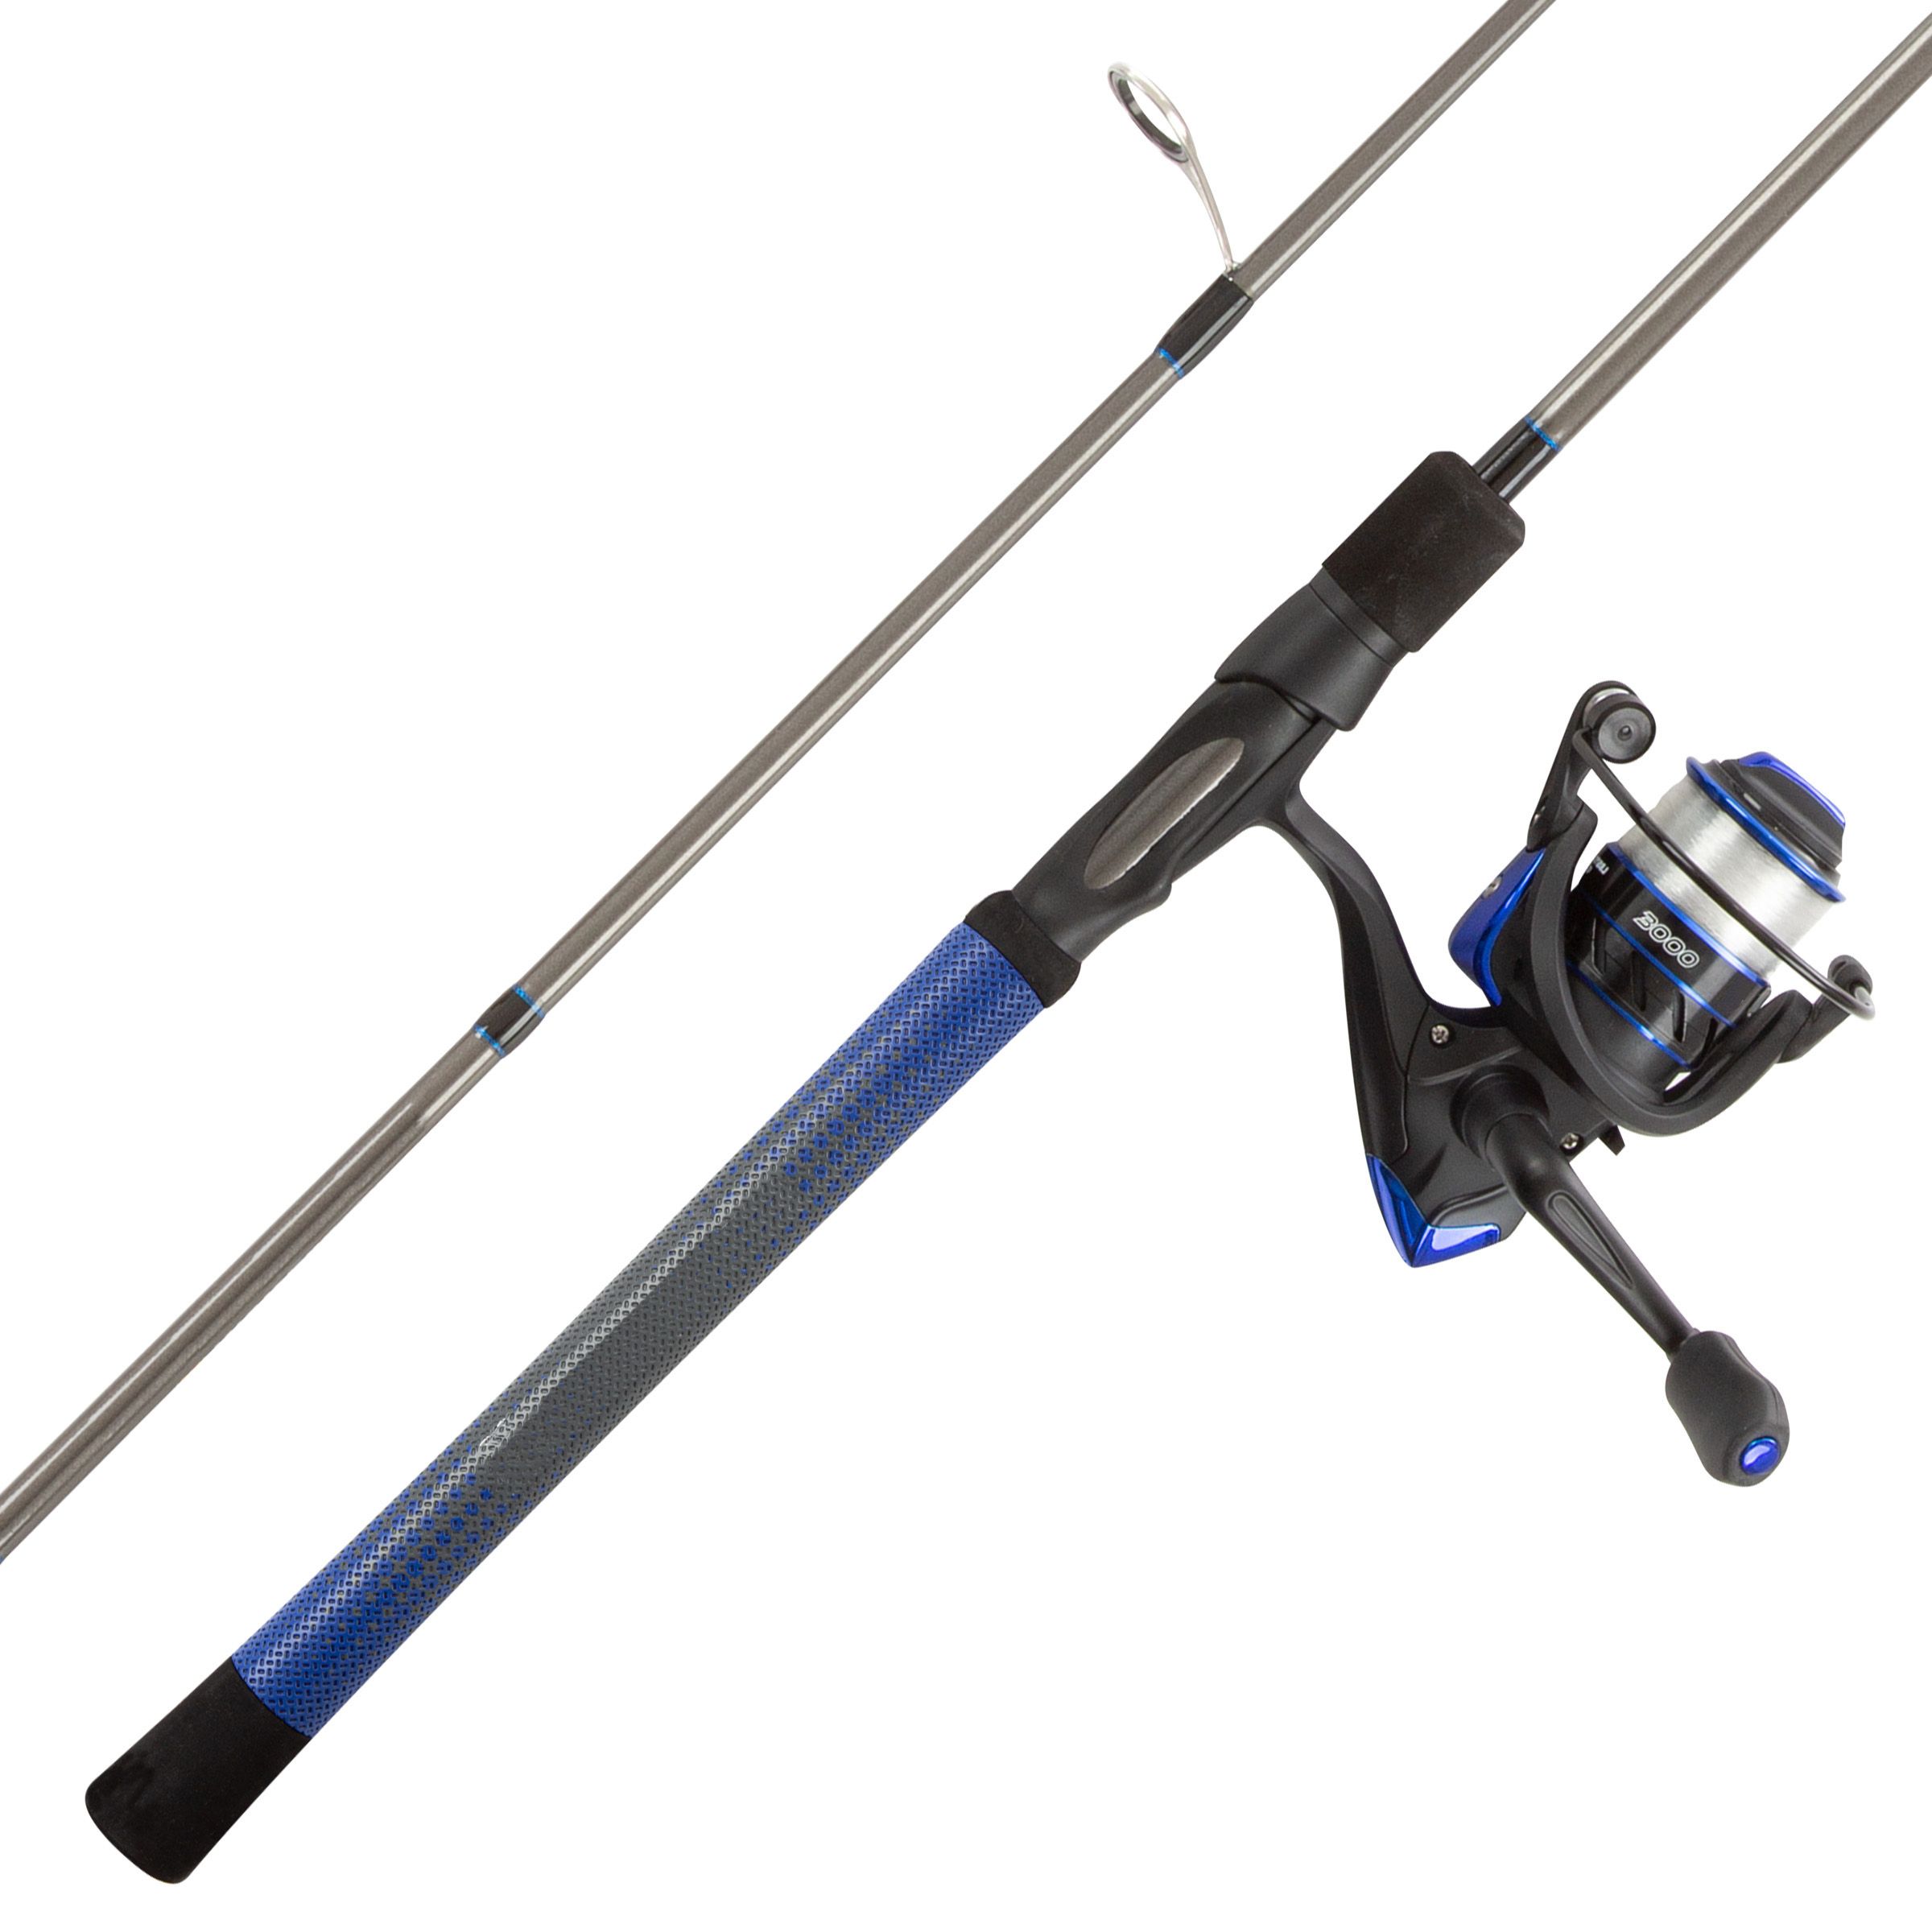 Leisure Sports RH Carbon Rod and Spinning Reel Fishing Combo - Blue